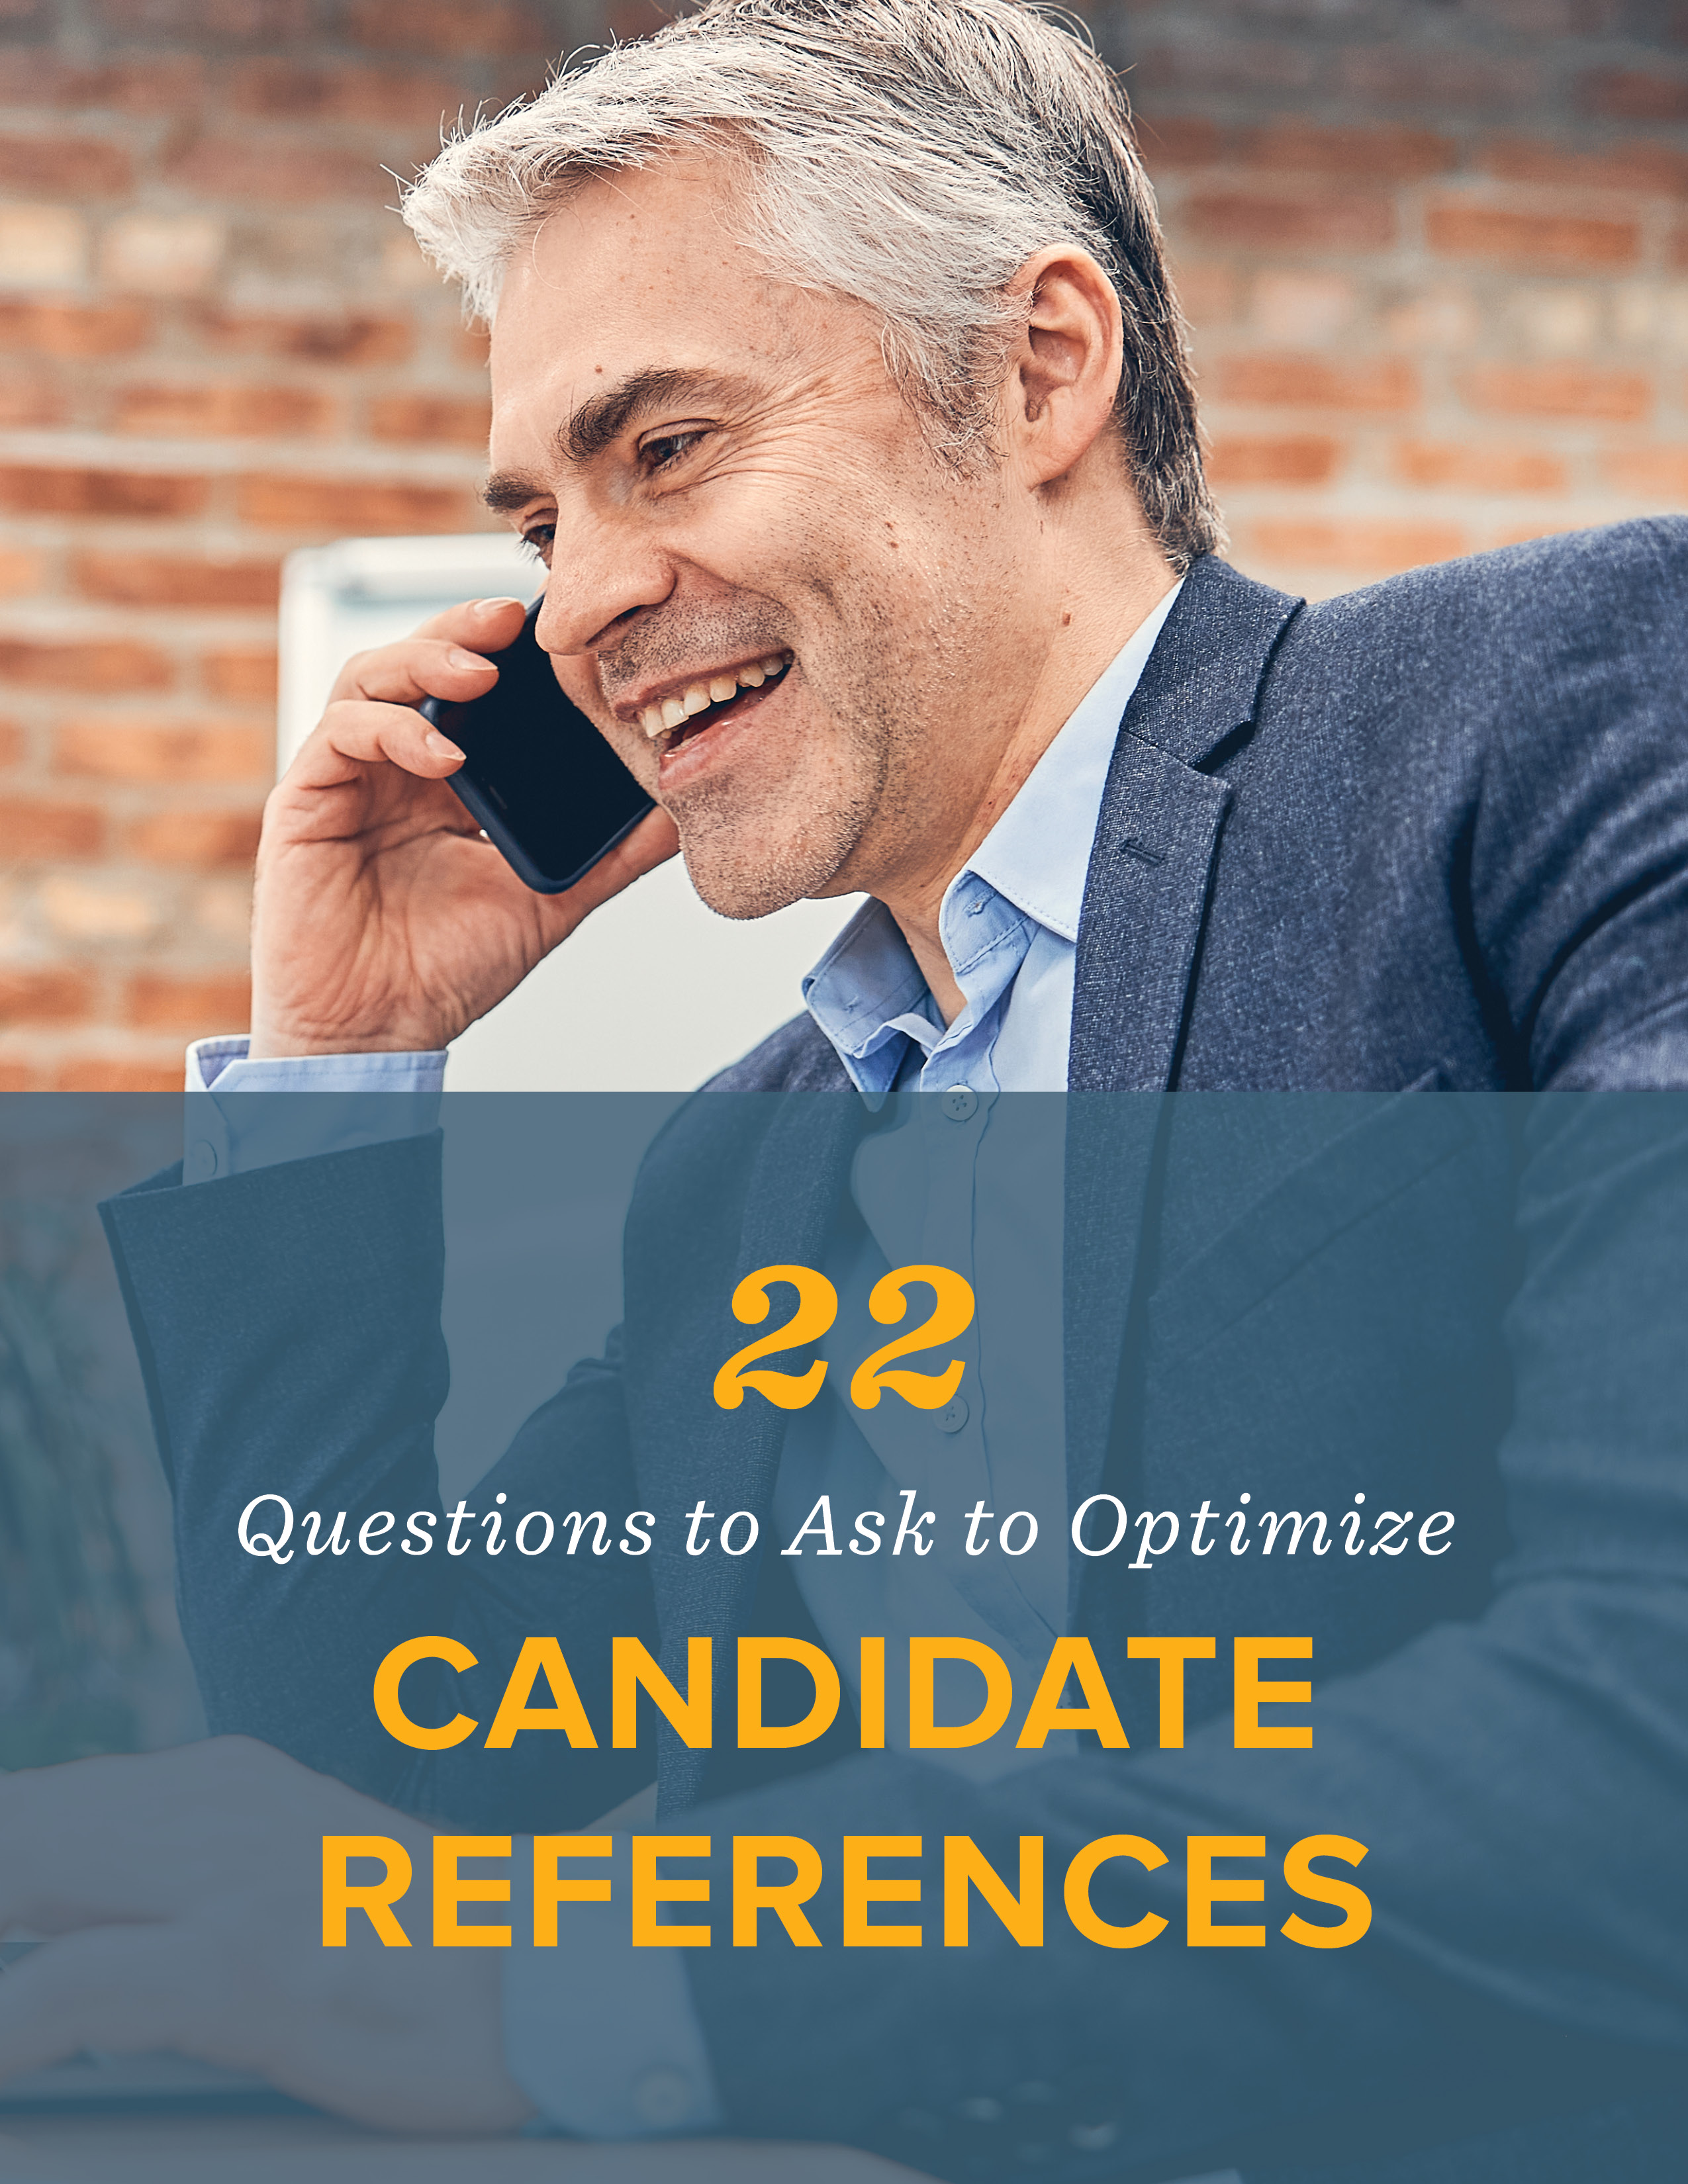 22 Questions to Ask to Optimize Candidate References